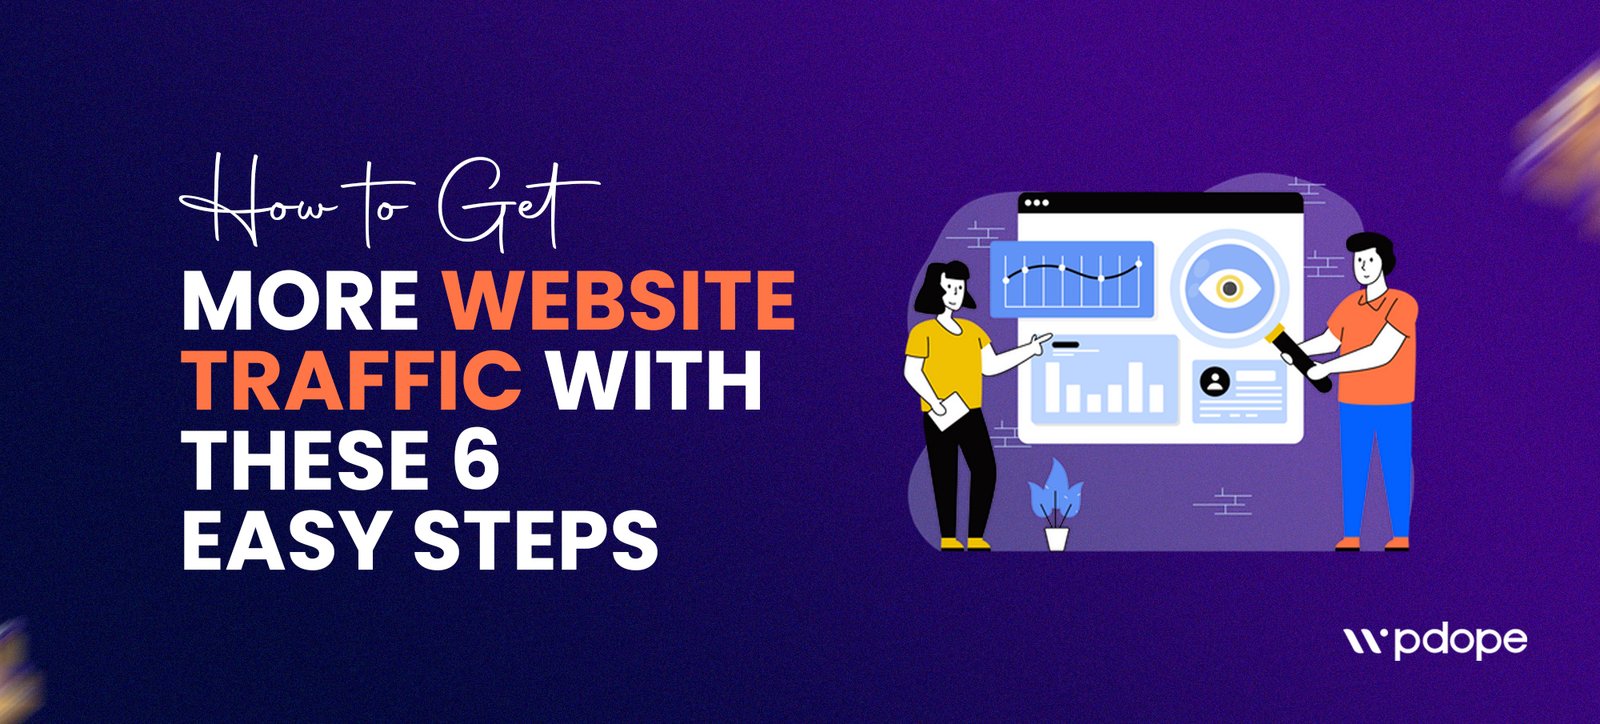 How to Get More Website Traffic with These 6 Easy Steps